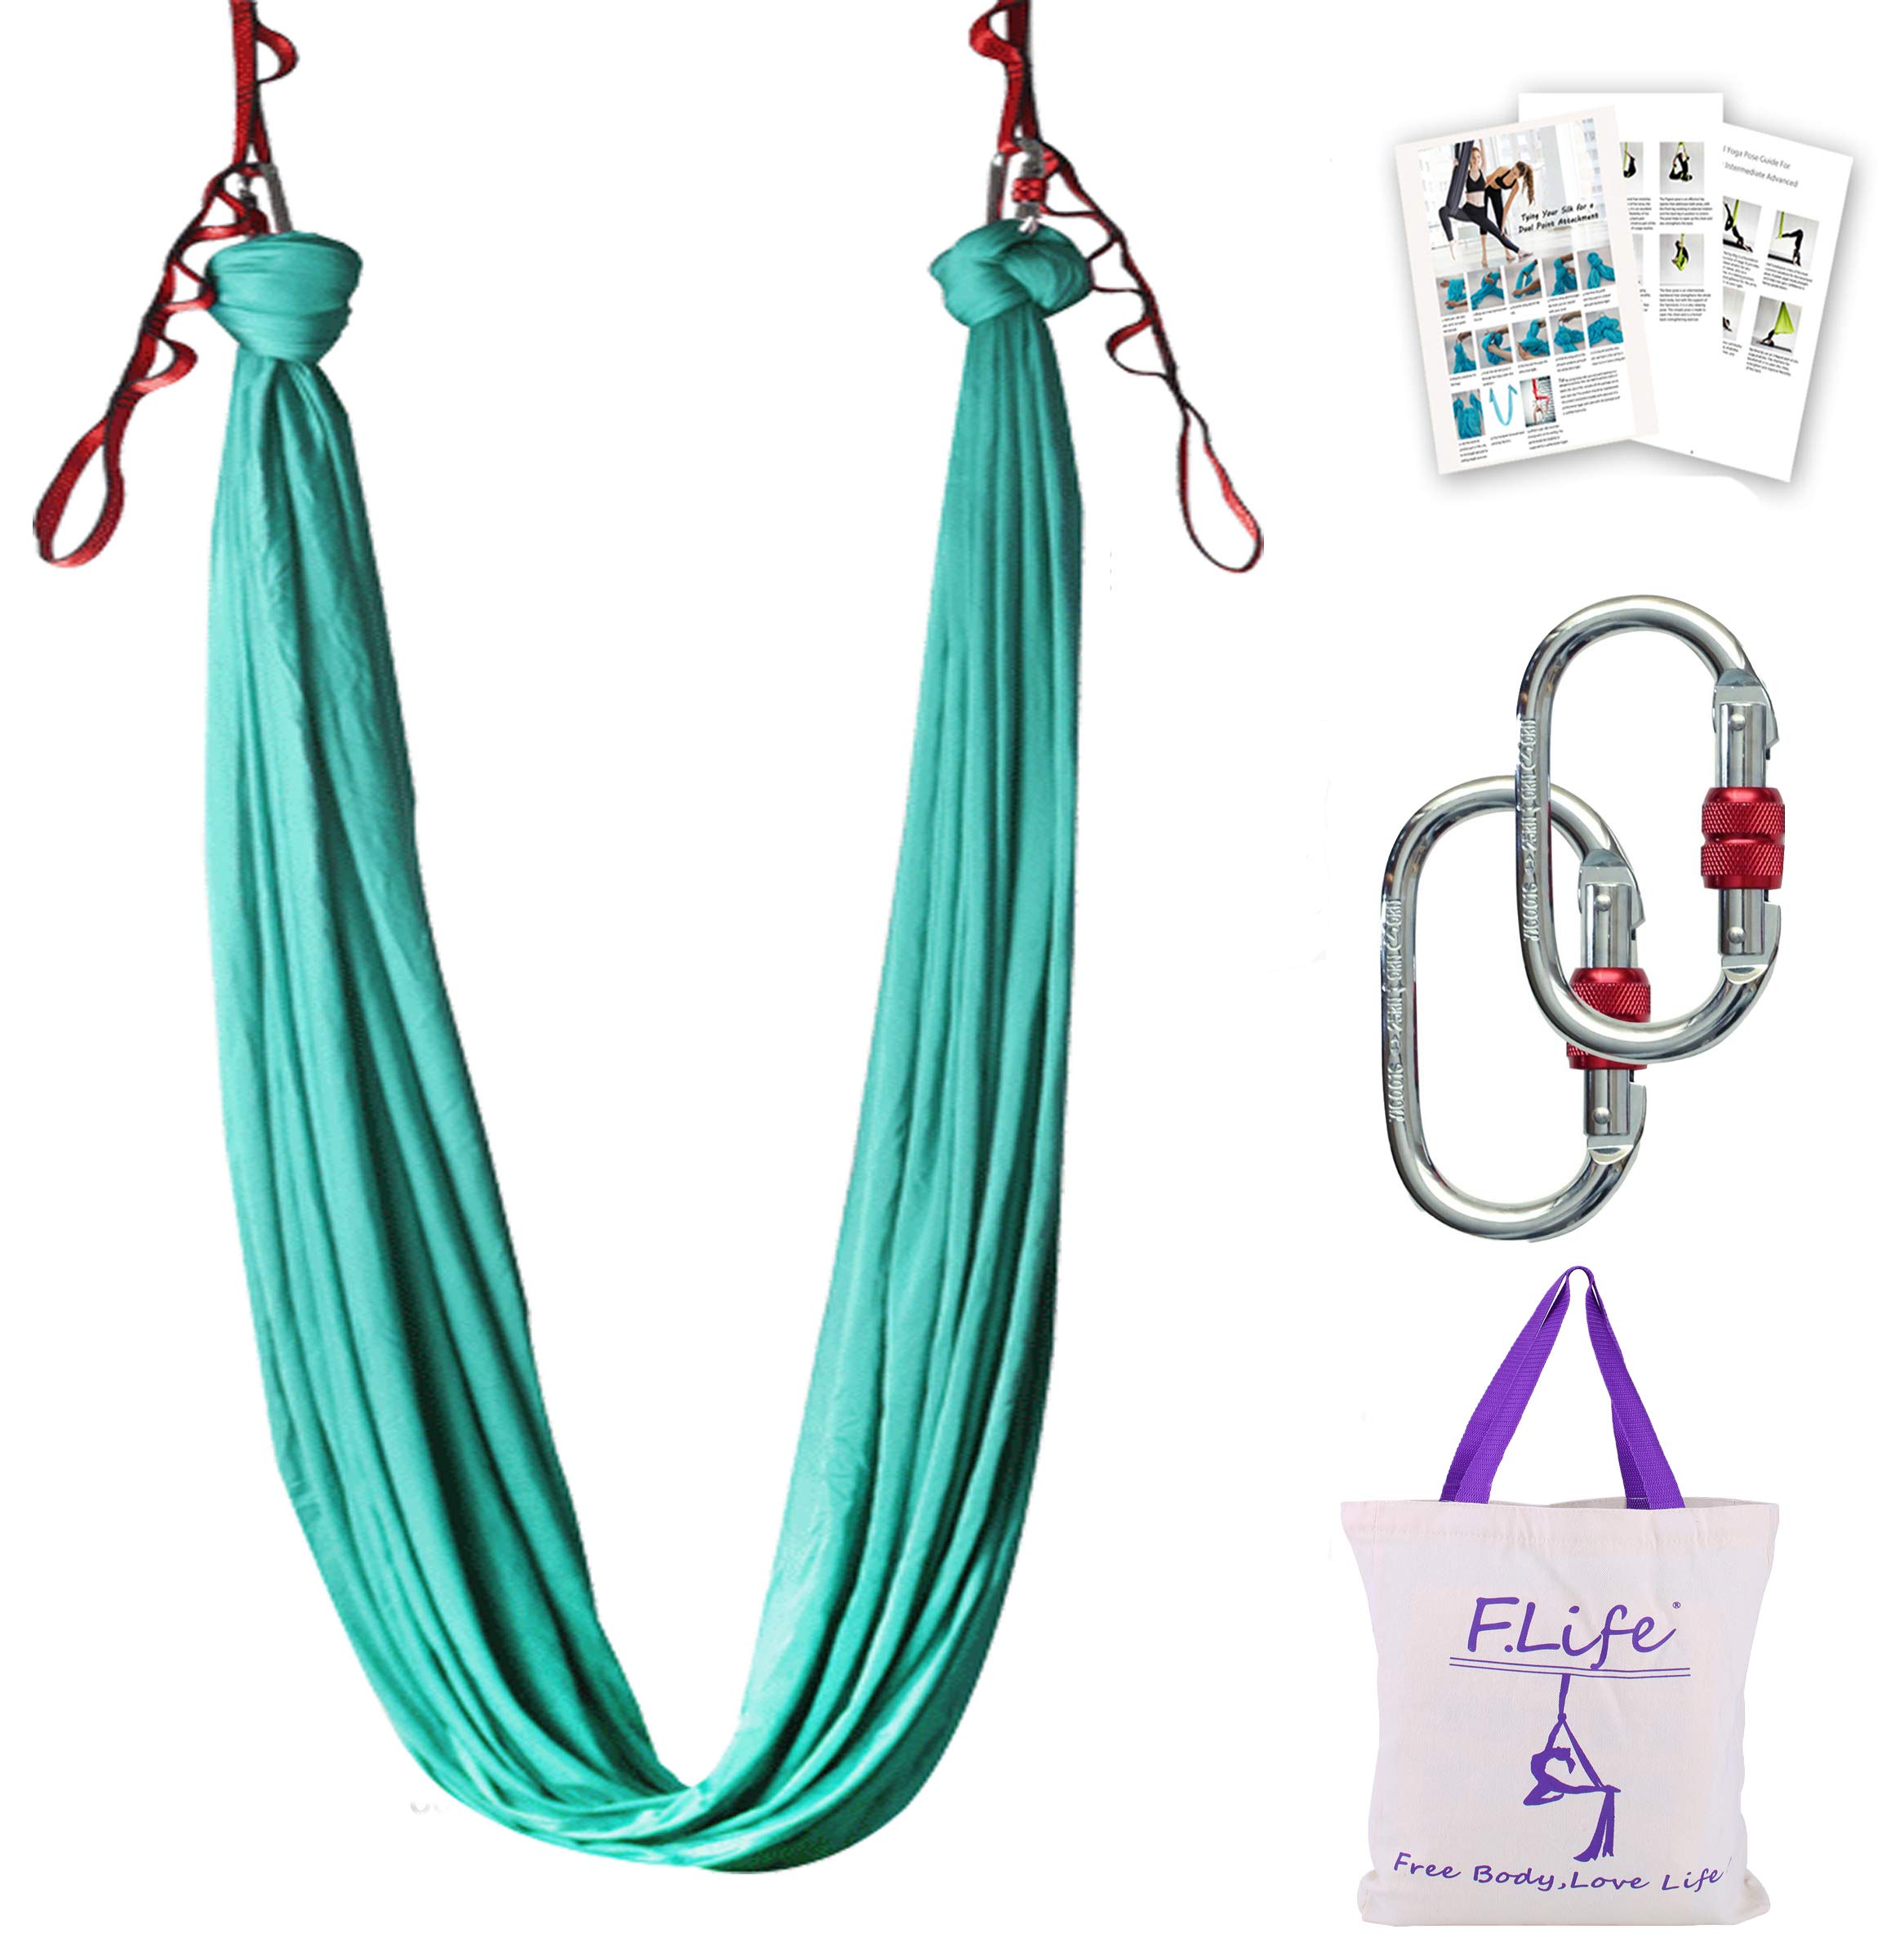  Active Silk Aerial Yoga Hammock 5.5 yards Premium Aerial Silk  Fabric Yoga Swing for Antigravity Yoga Inversion Include Daisy Chain  Carabiner and Pose Guide : Sports & Outdoors